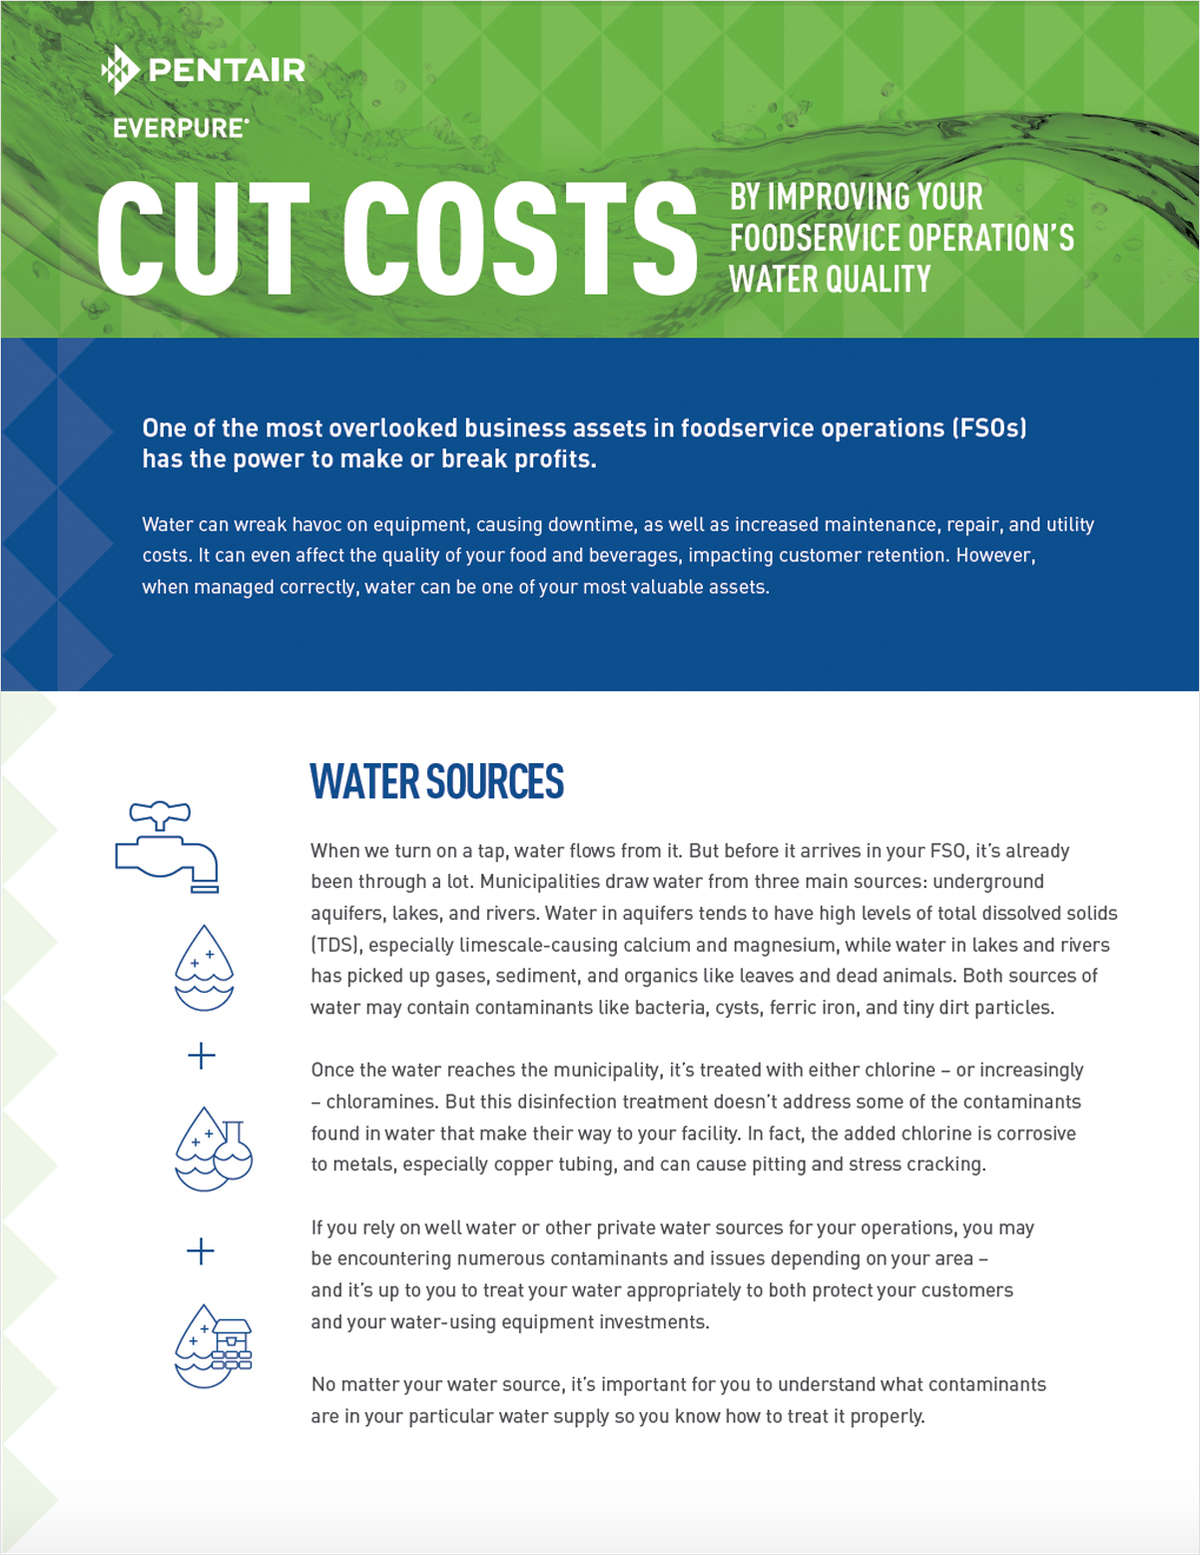 White Paper: Cut Costs by Improving Your Foodservice Operation's Water Quality